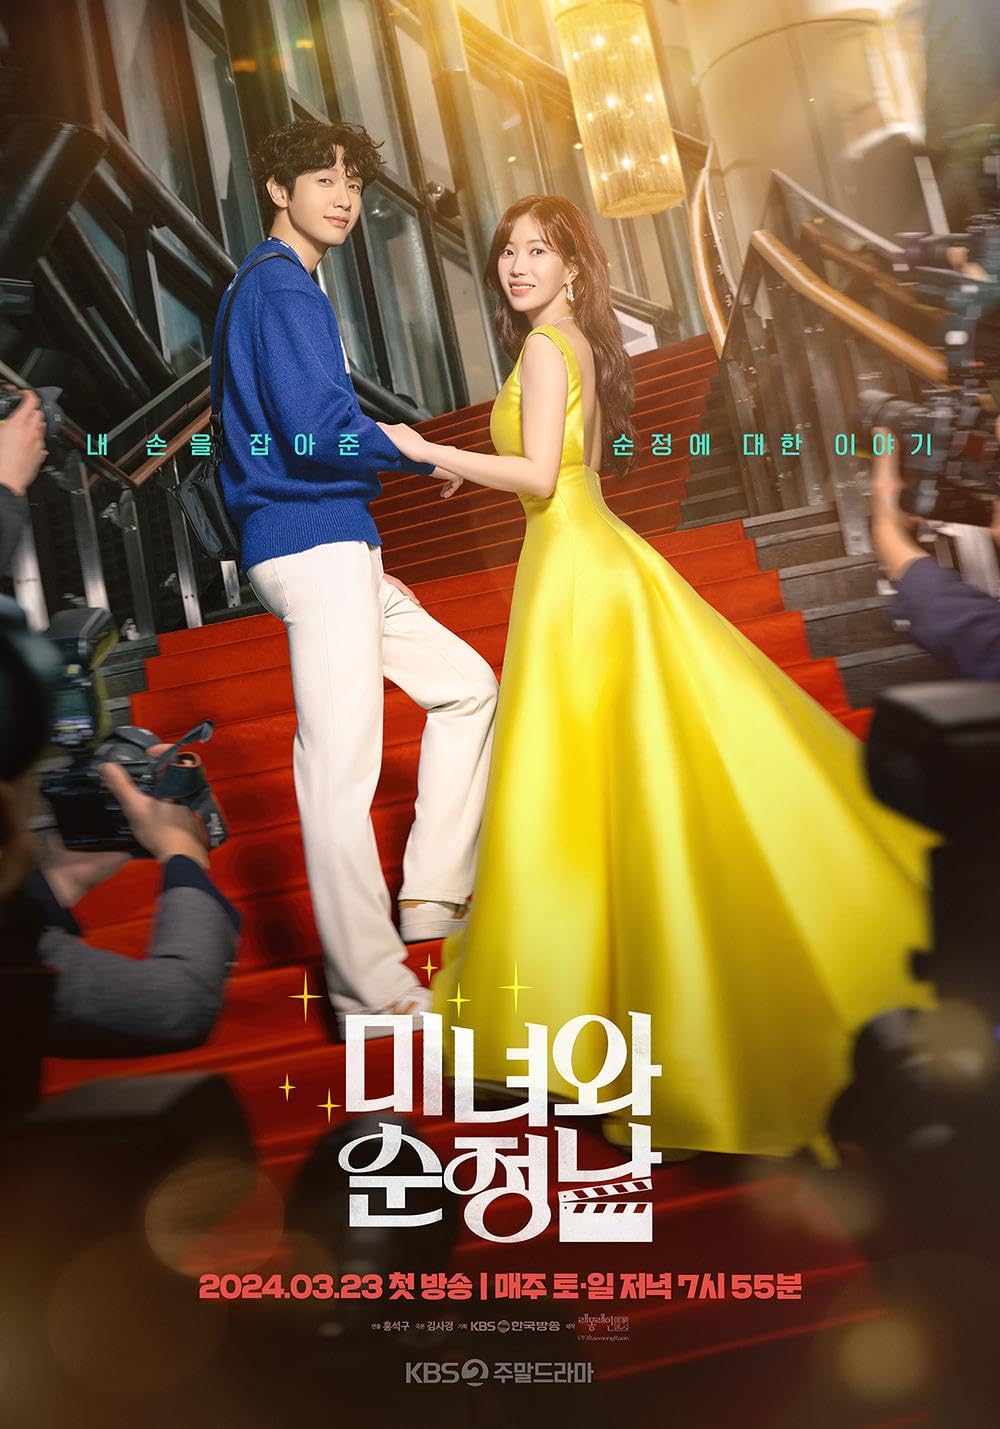 Beauty and Mr. Romantic Season 1 (Episode 23 Added)